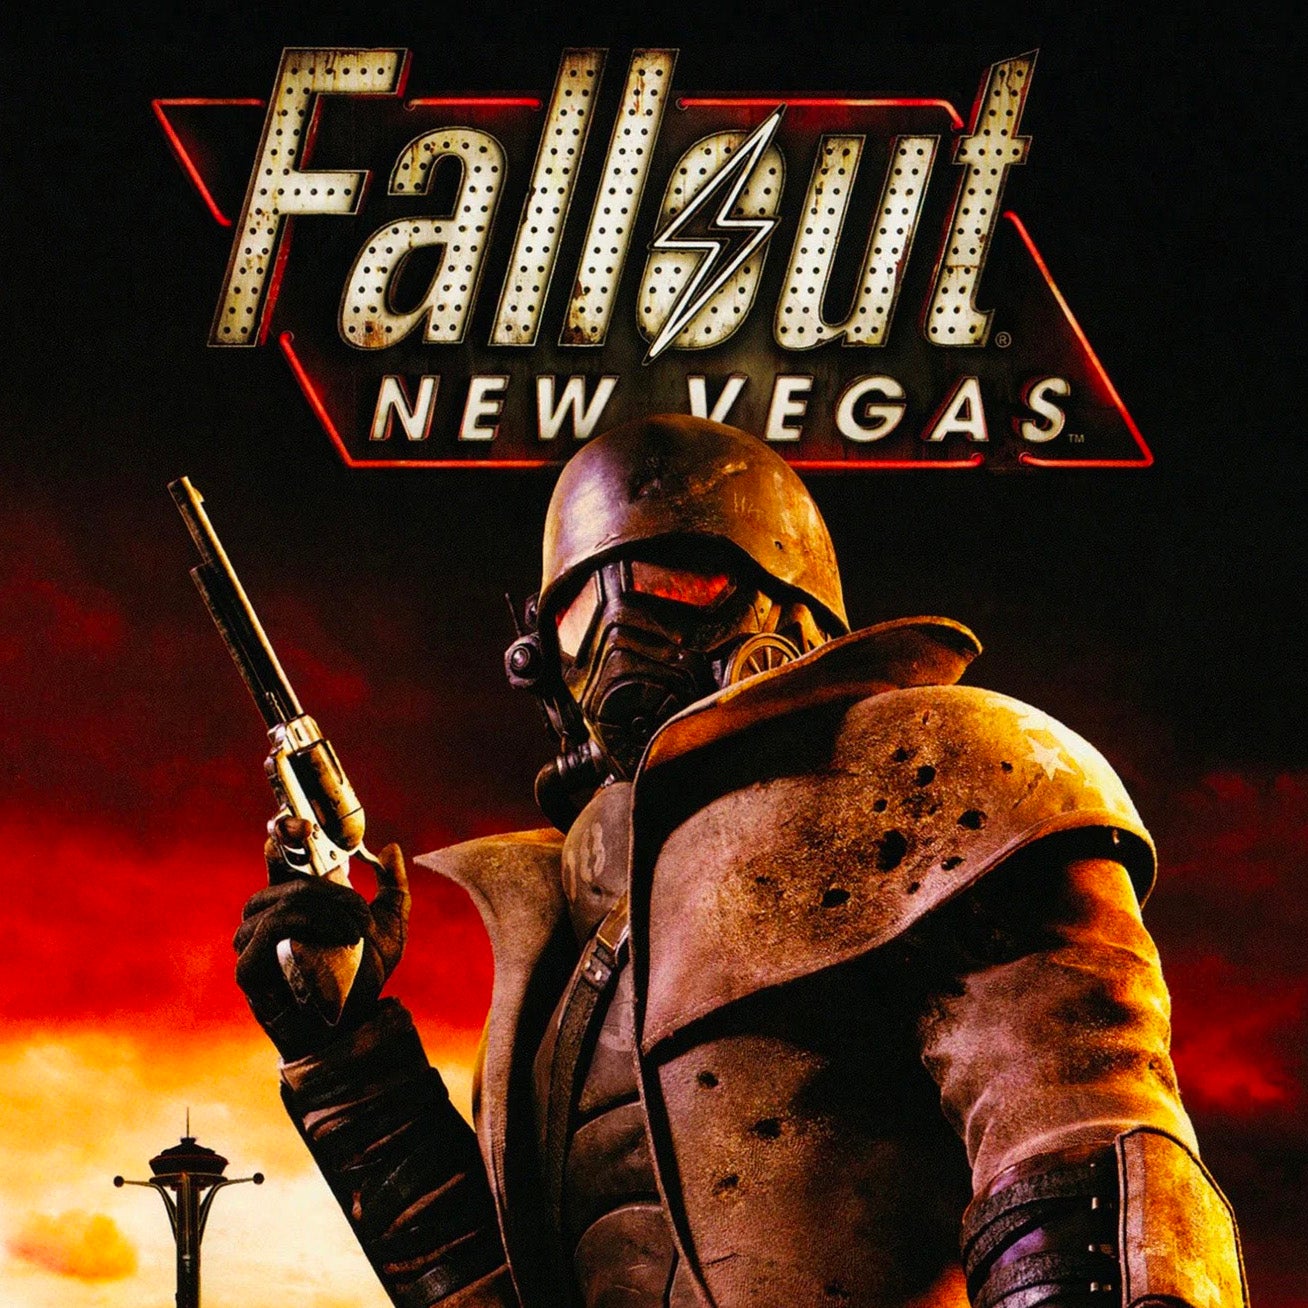 Download Fallout New Vegas Game Full Version